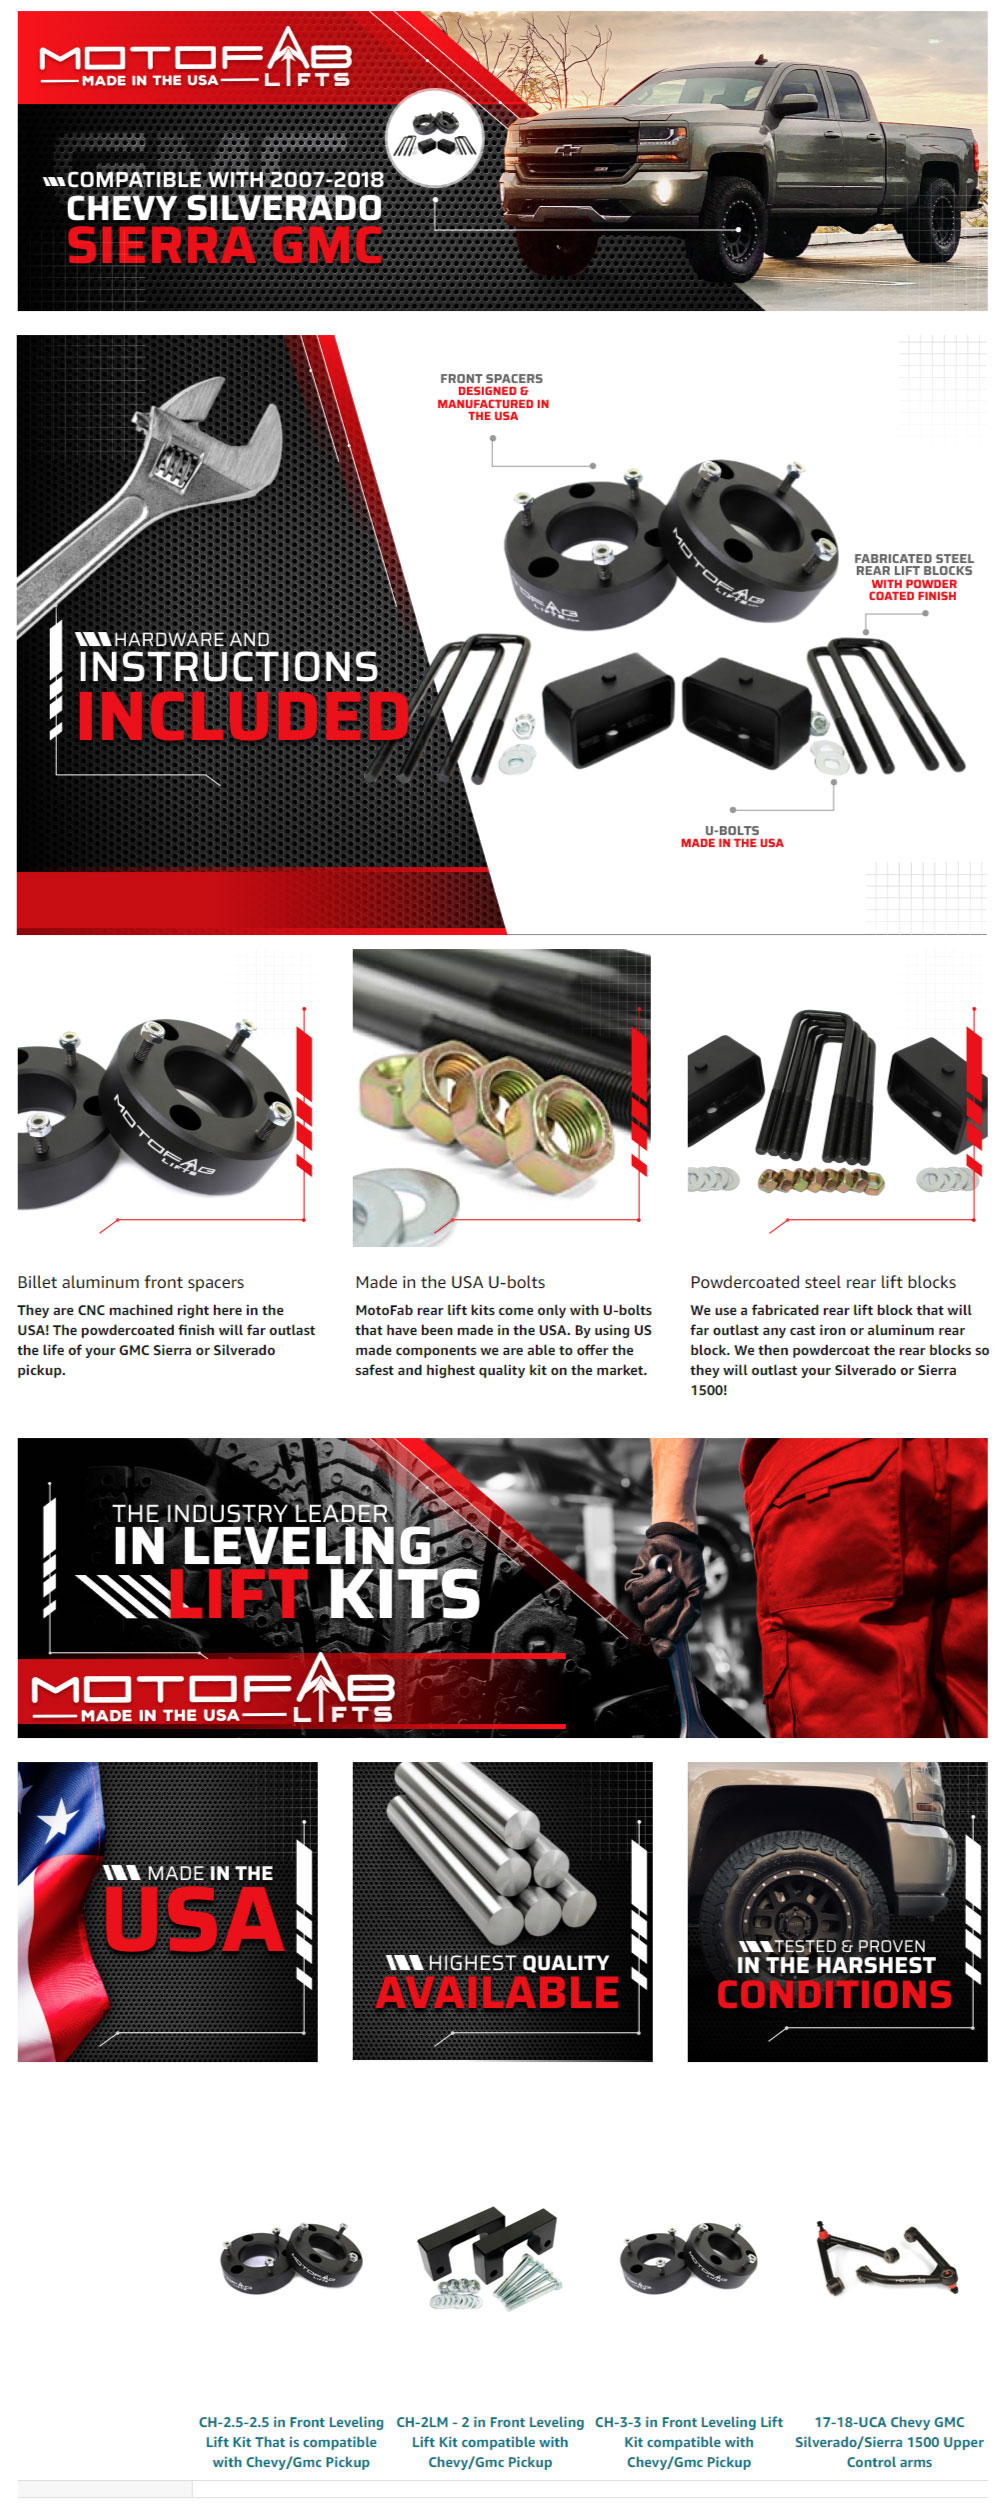 MotoFab Lifts Amazon A+ Content Example